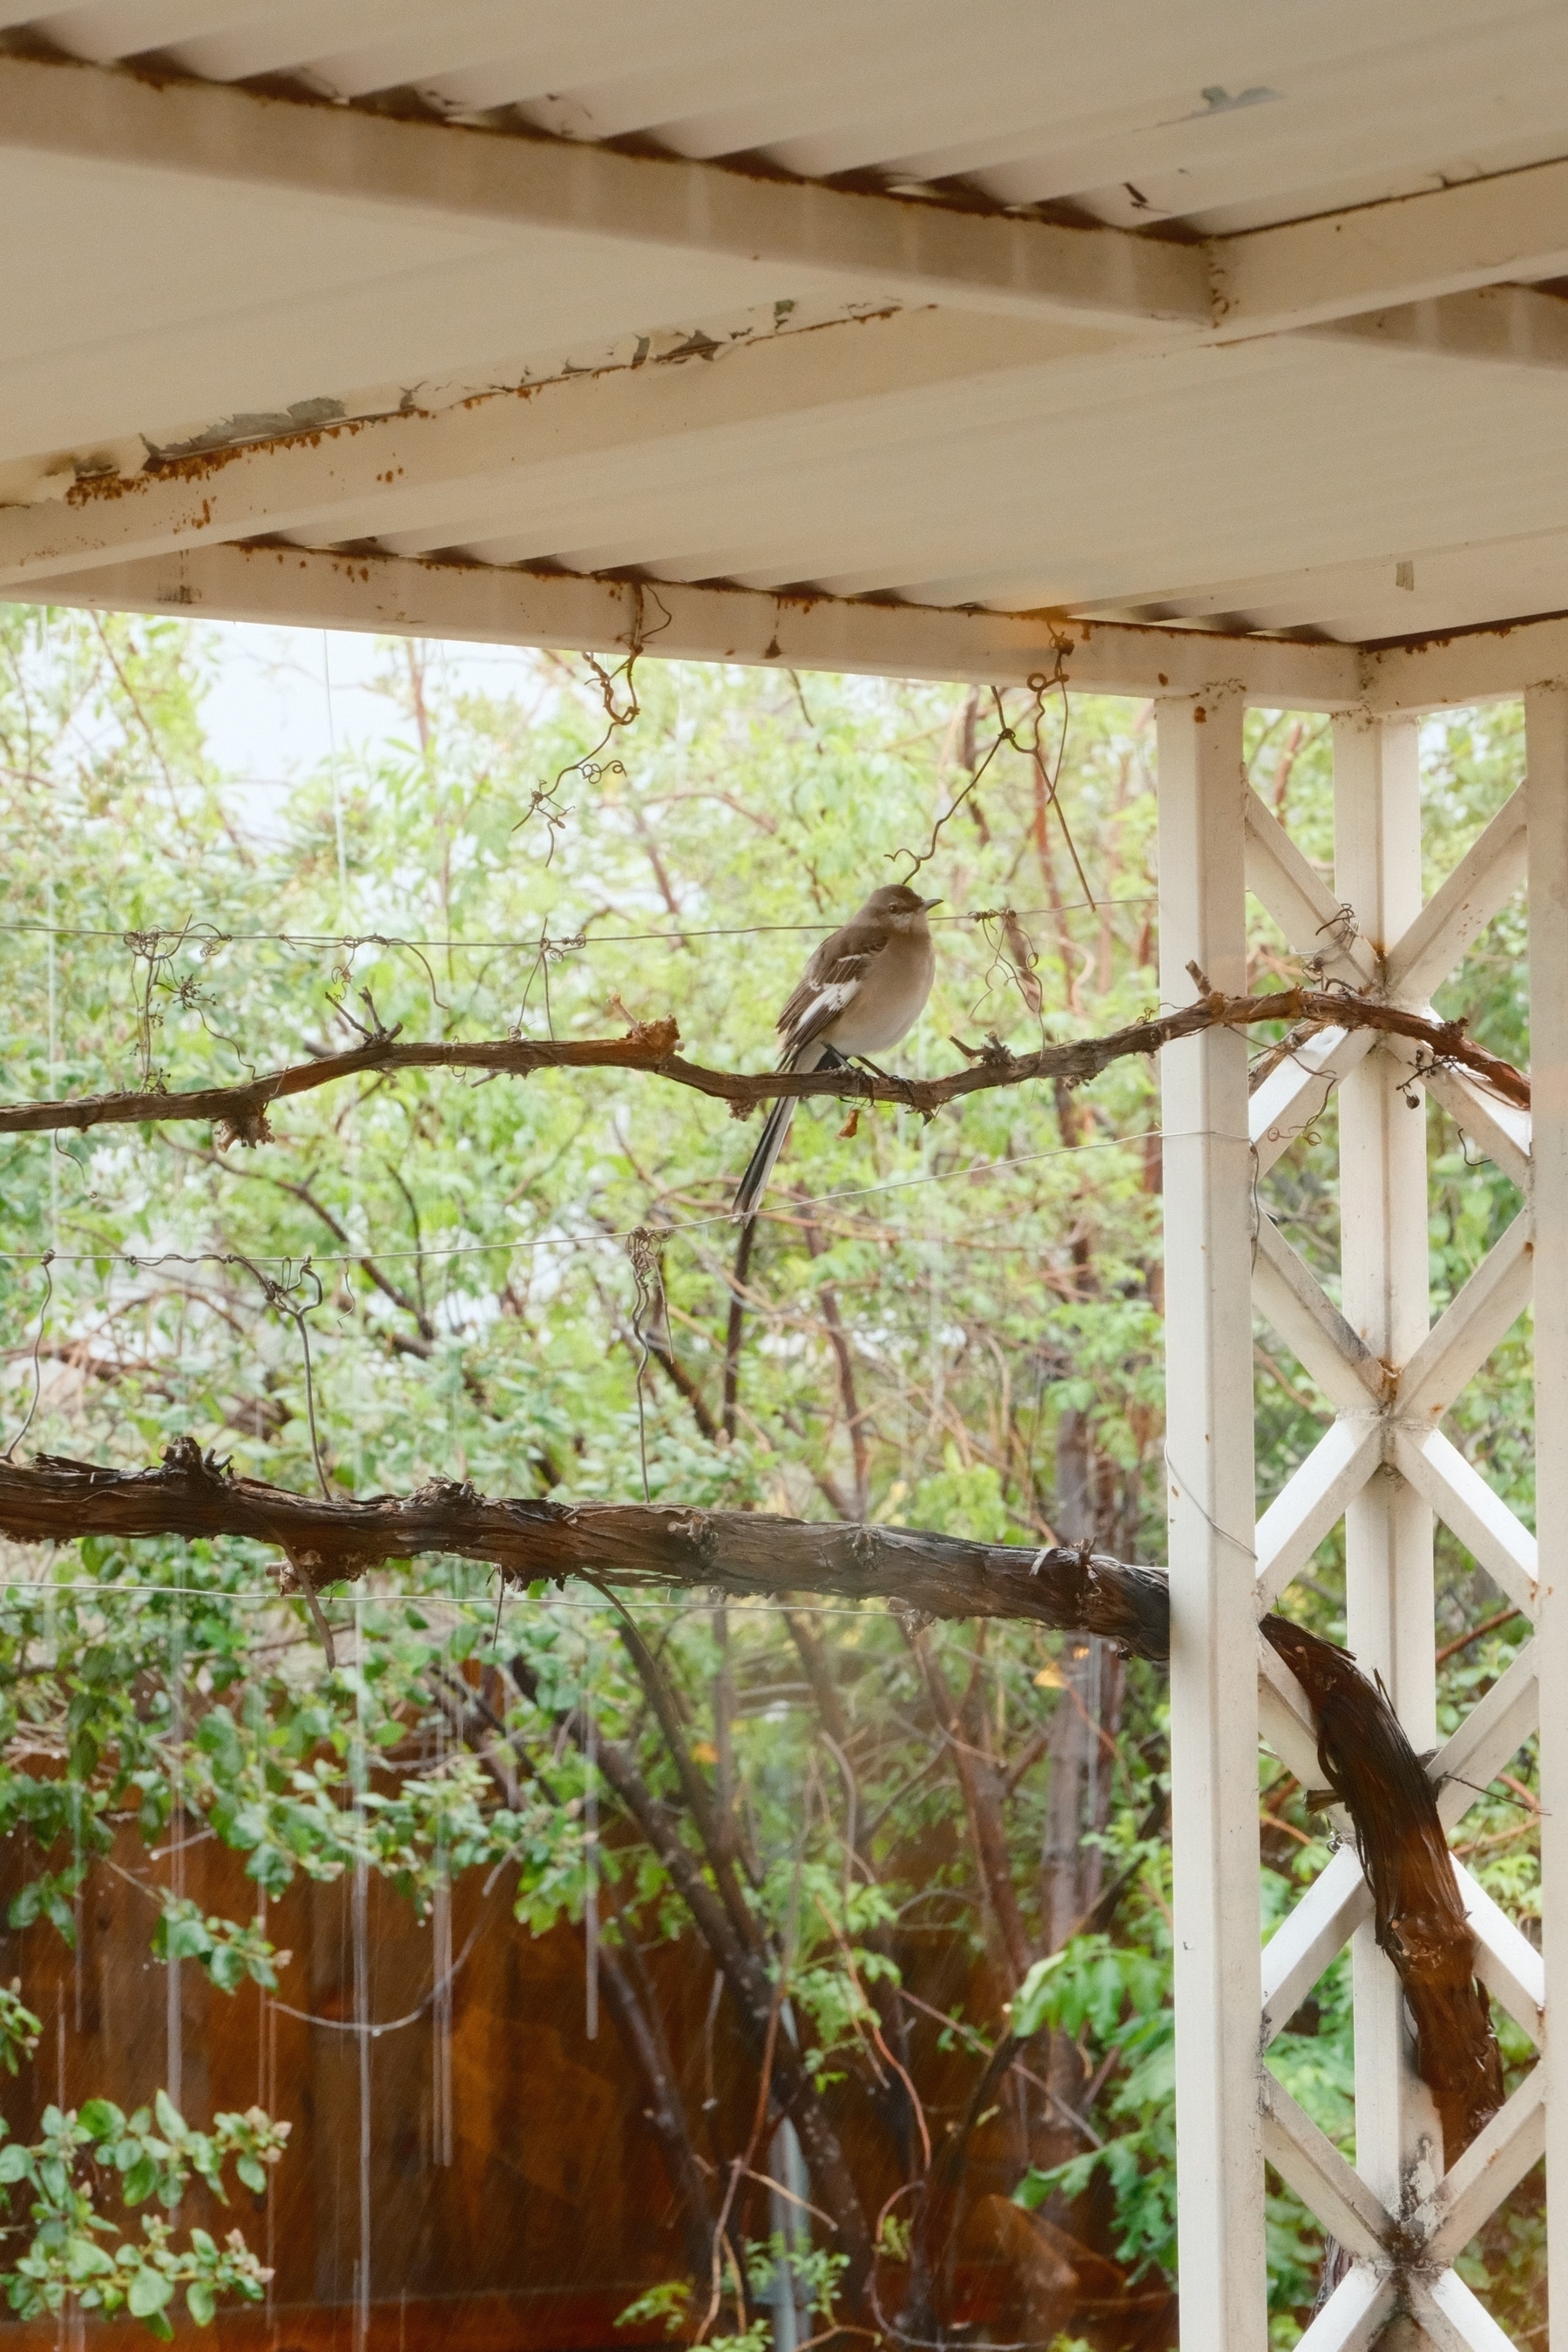 A western mockingbird perched on a vine-under a shelter of a white metal overhang with green vegetation and rain visibly falling in the background.